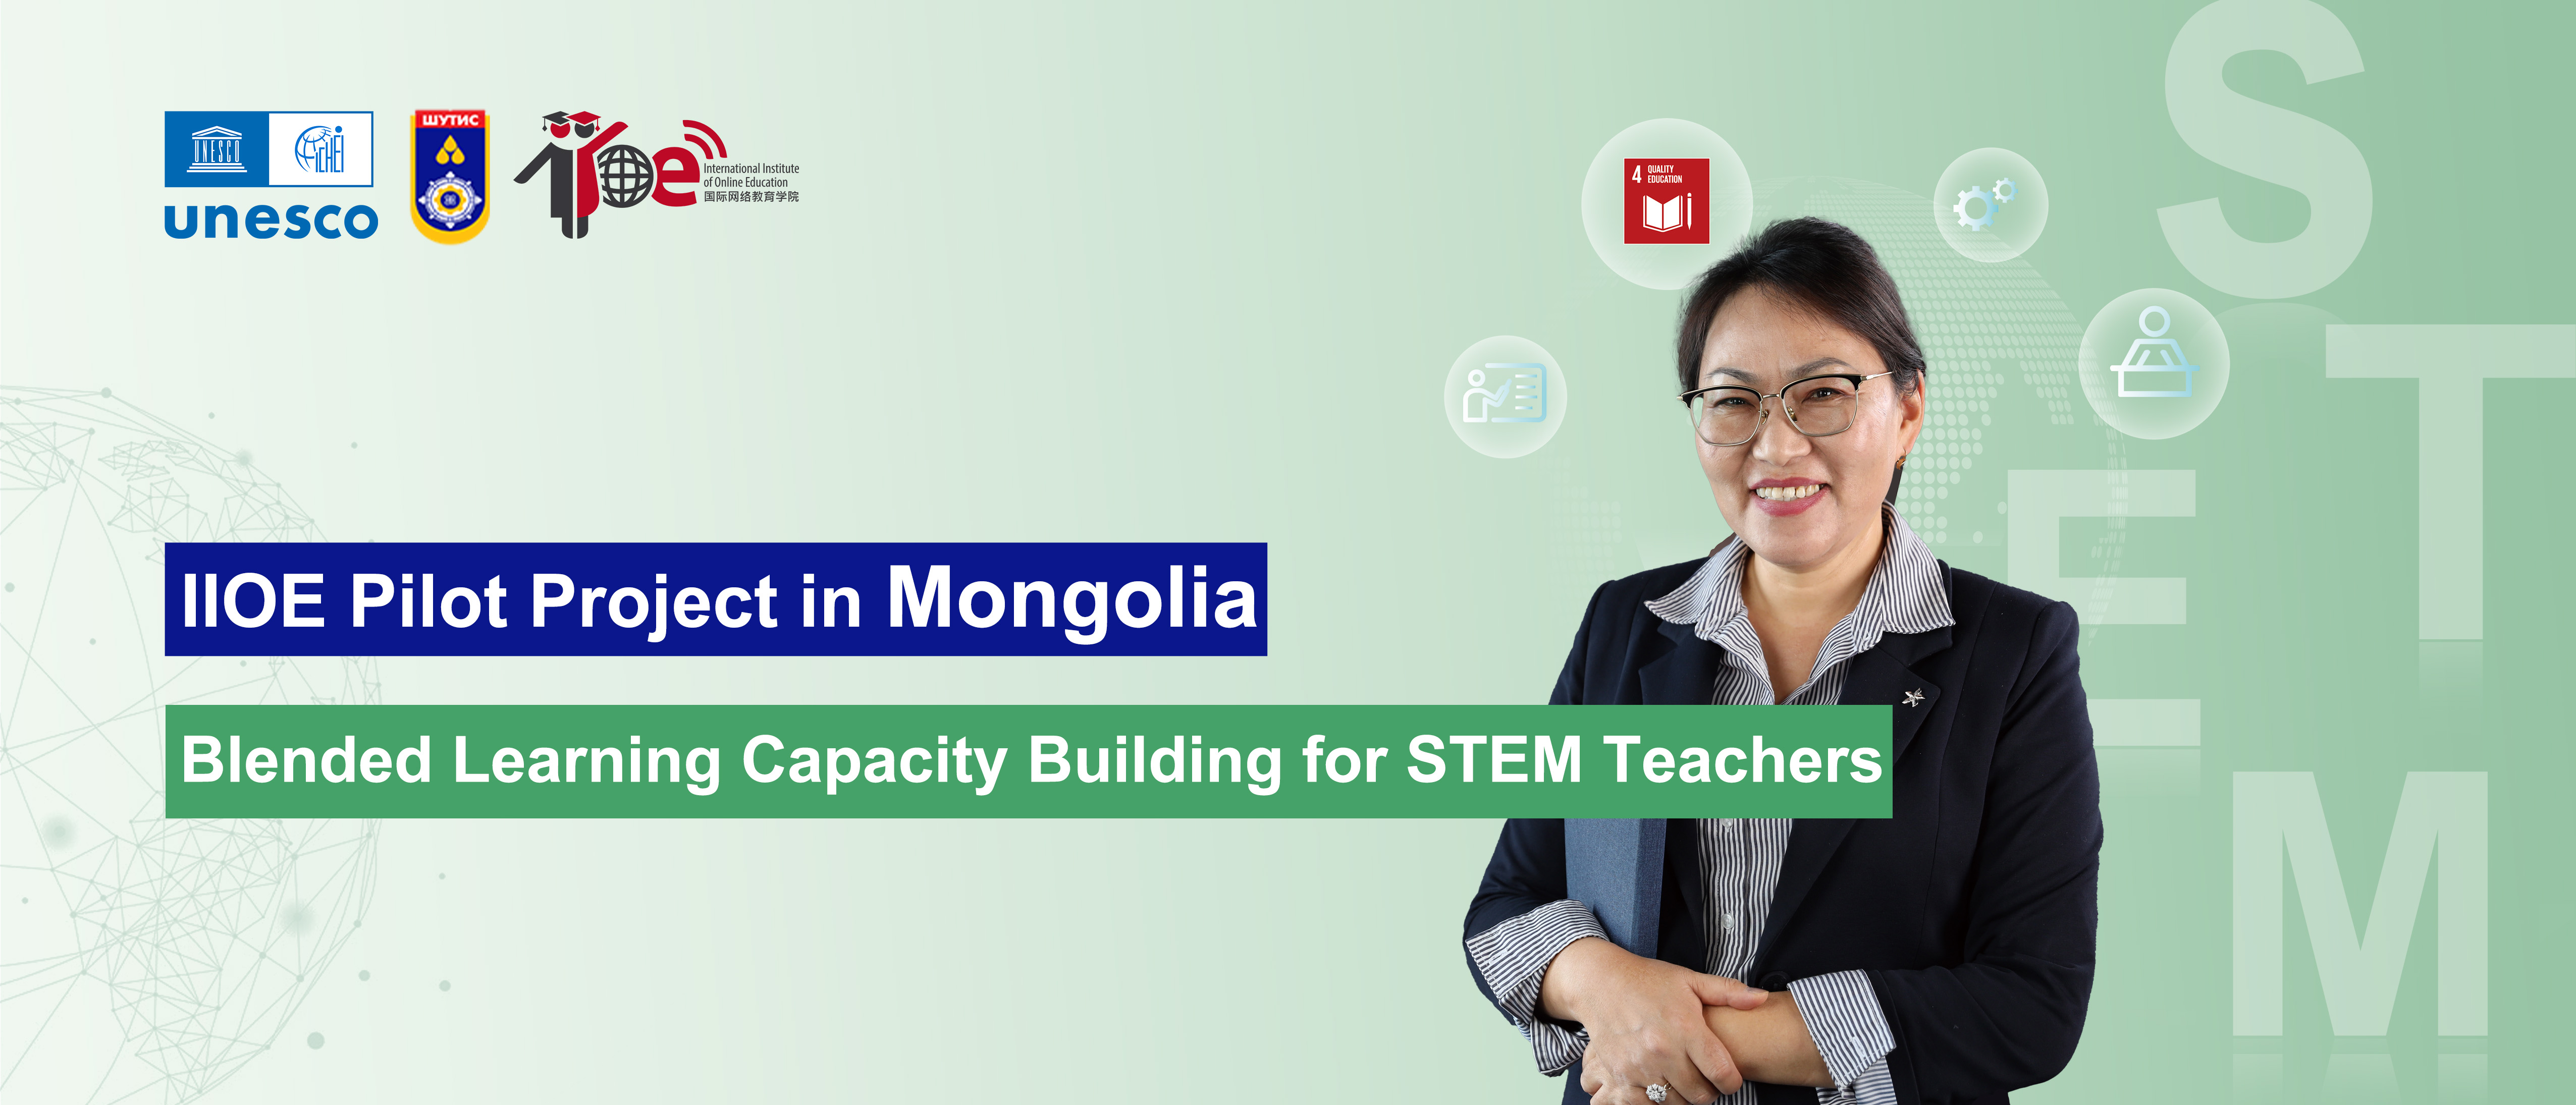 IIOE Pilot Project in Mongolia - Blended Learning Capacity Building for STEM Teachers